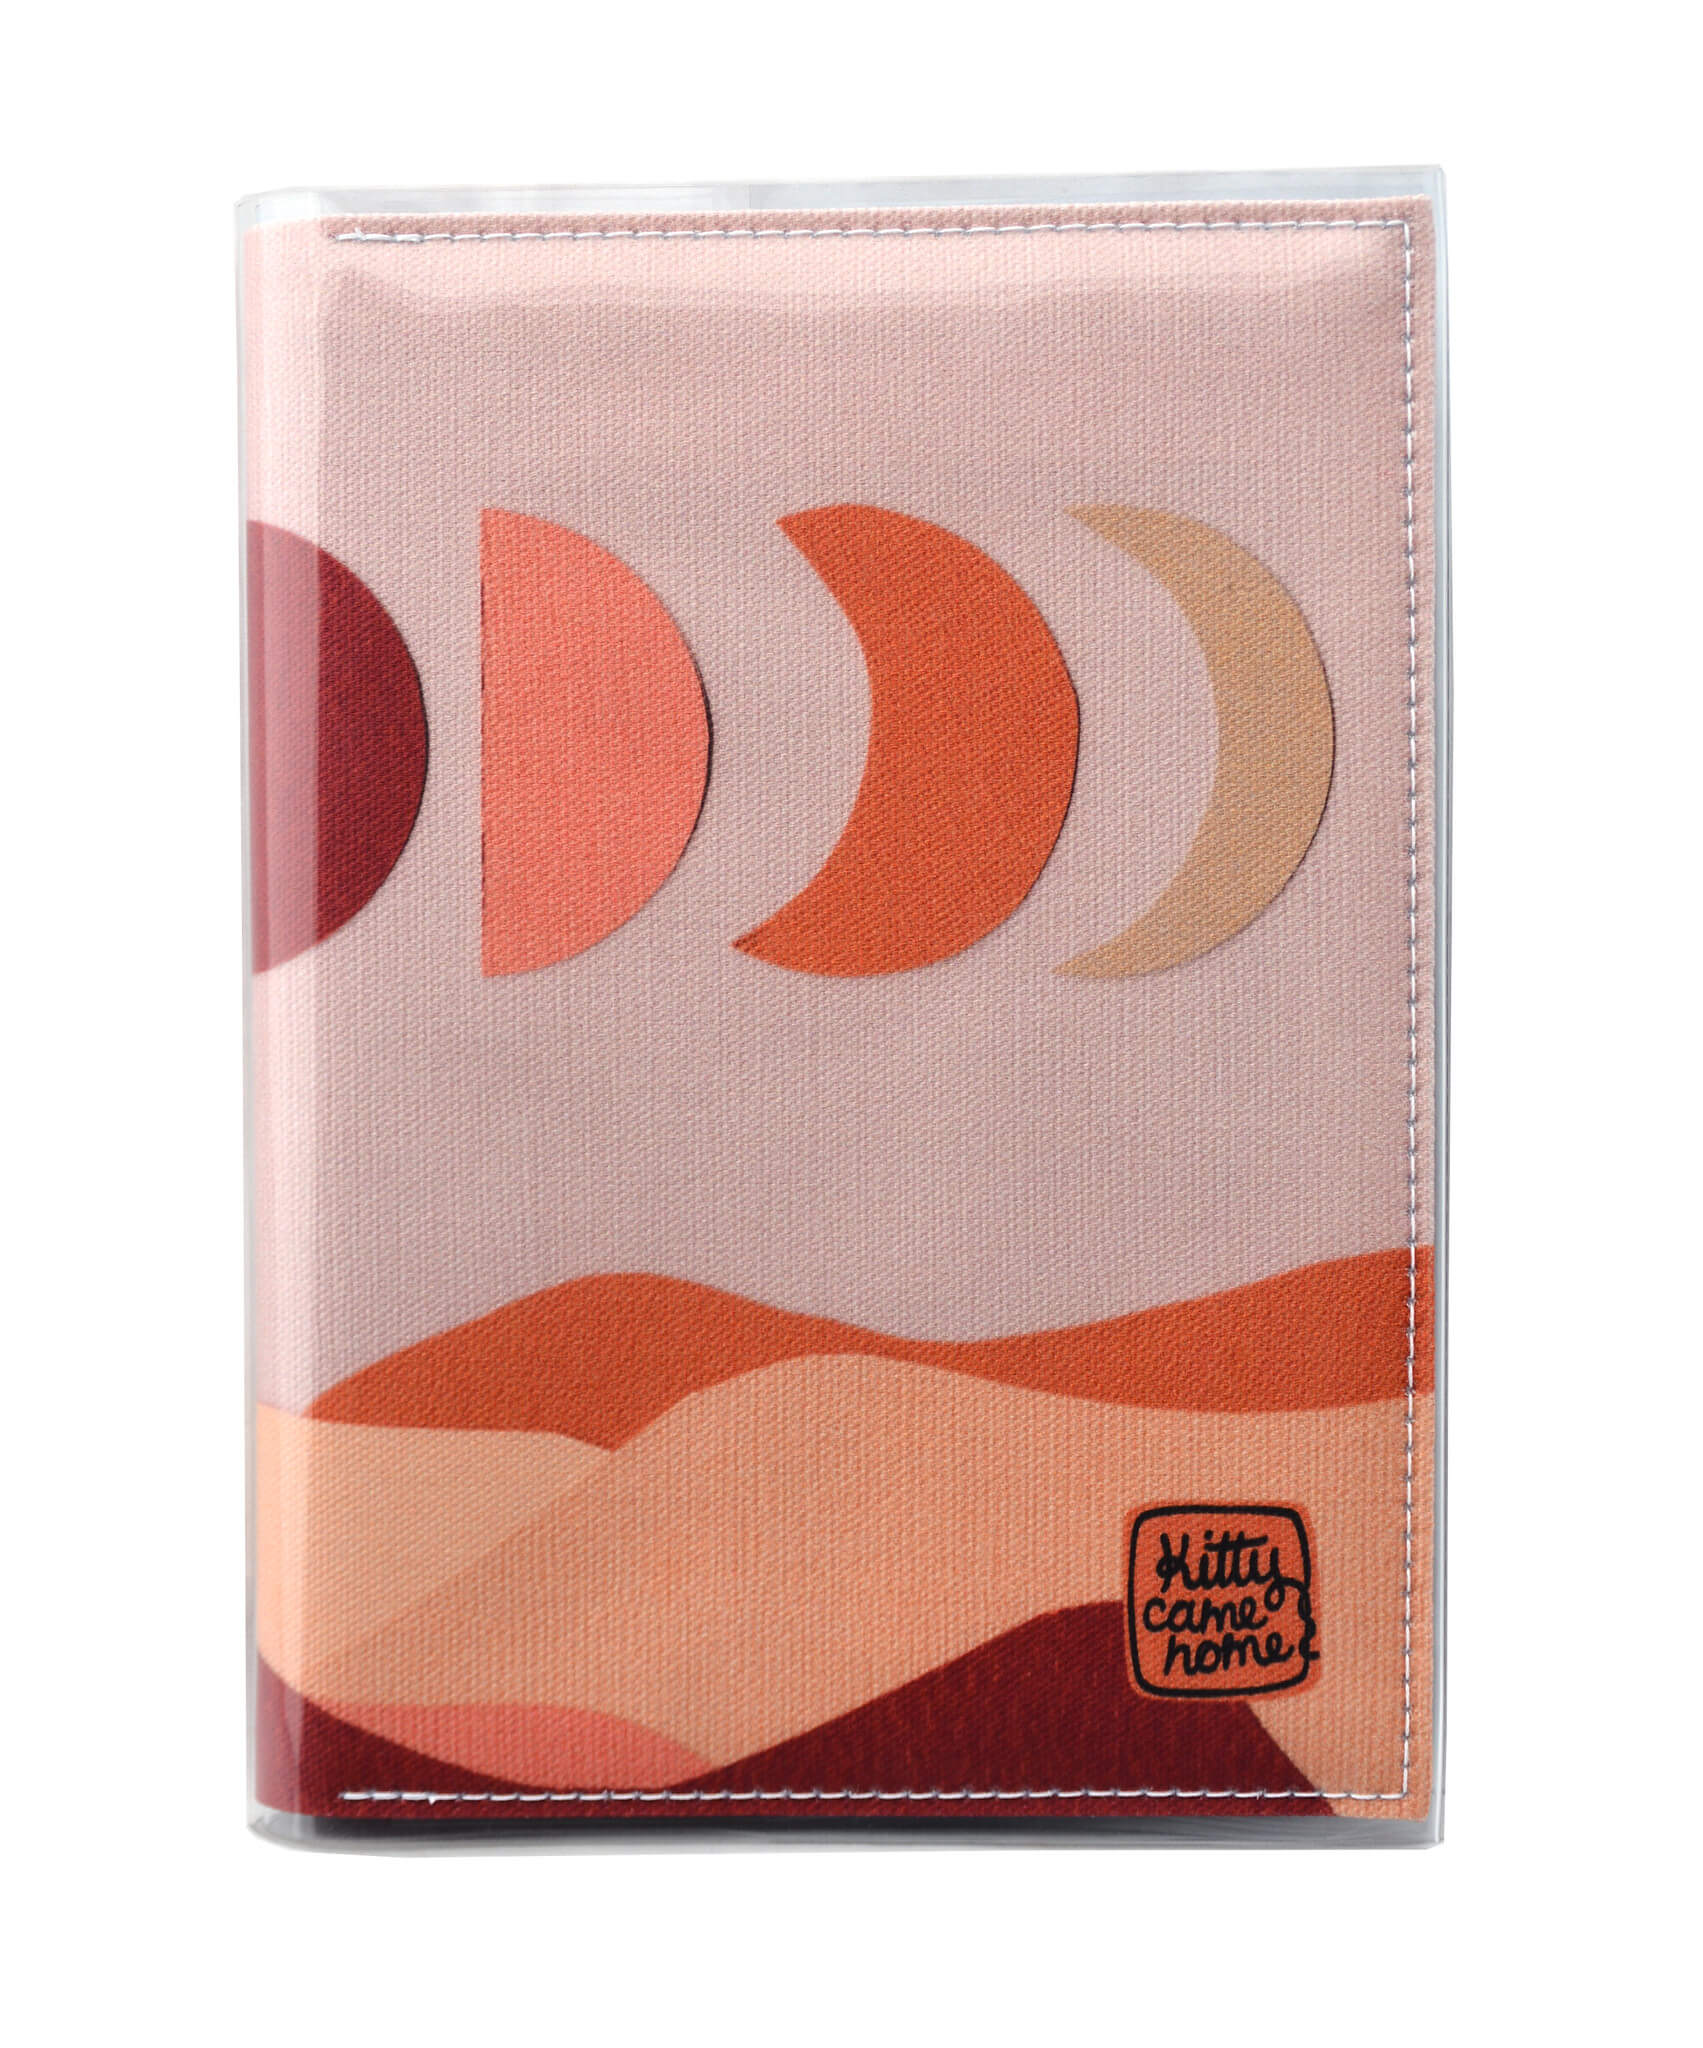 This is an image of the front of a Kitty Came Home A5 journal in the 'Moonshadow drive’ design by Satin and Tat. The moon appears in all its phases in a dusty pink sky above a landscape lit by the moon's colours: burgundy, oranges, and apricot.